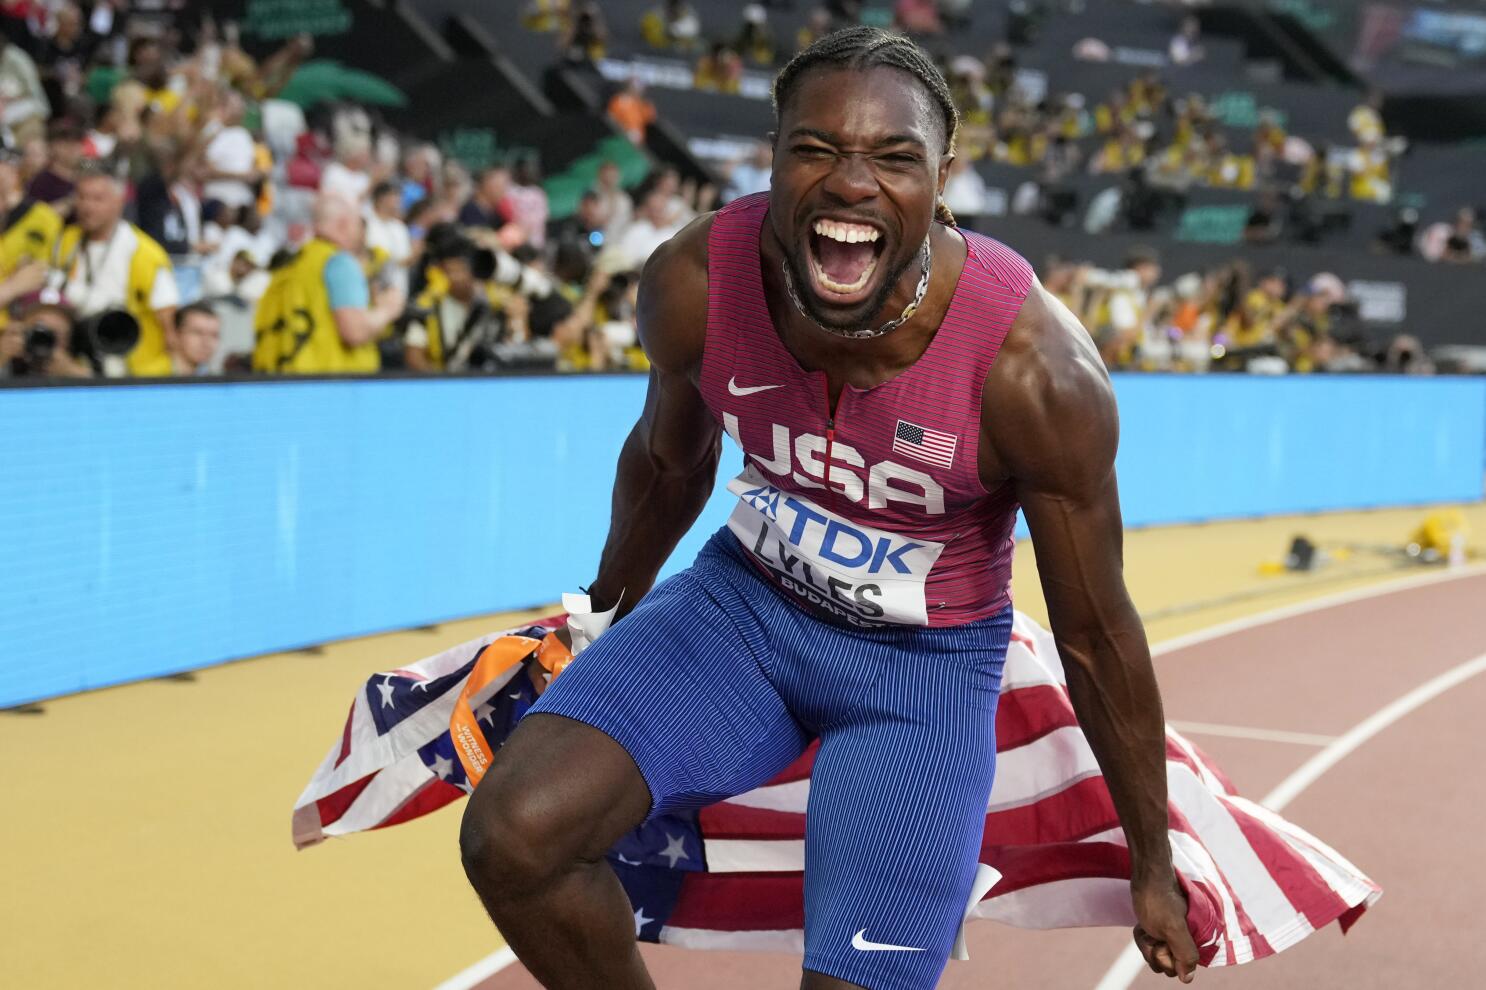 Sprinter Noah Lyles wants to be more than world's fastest man